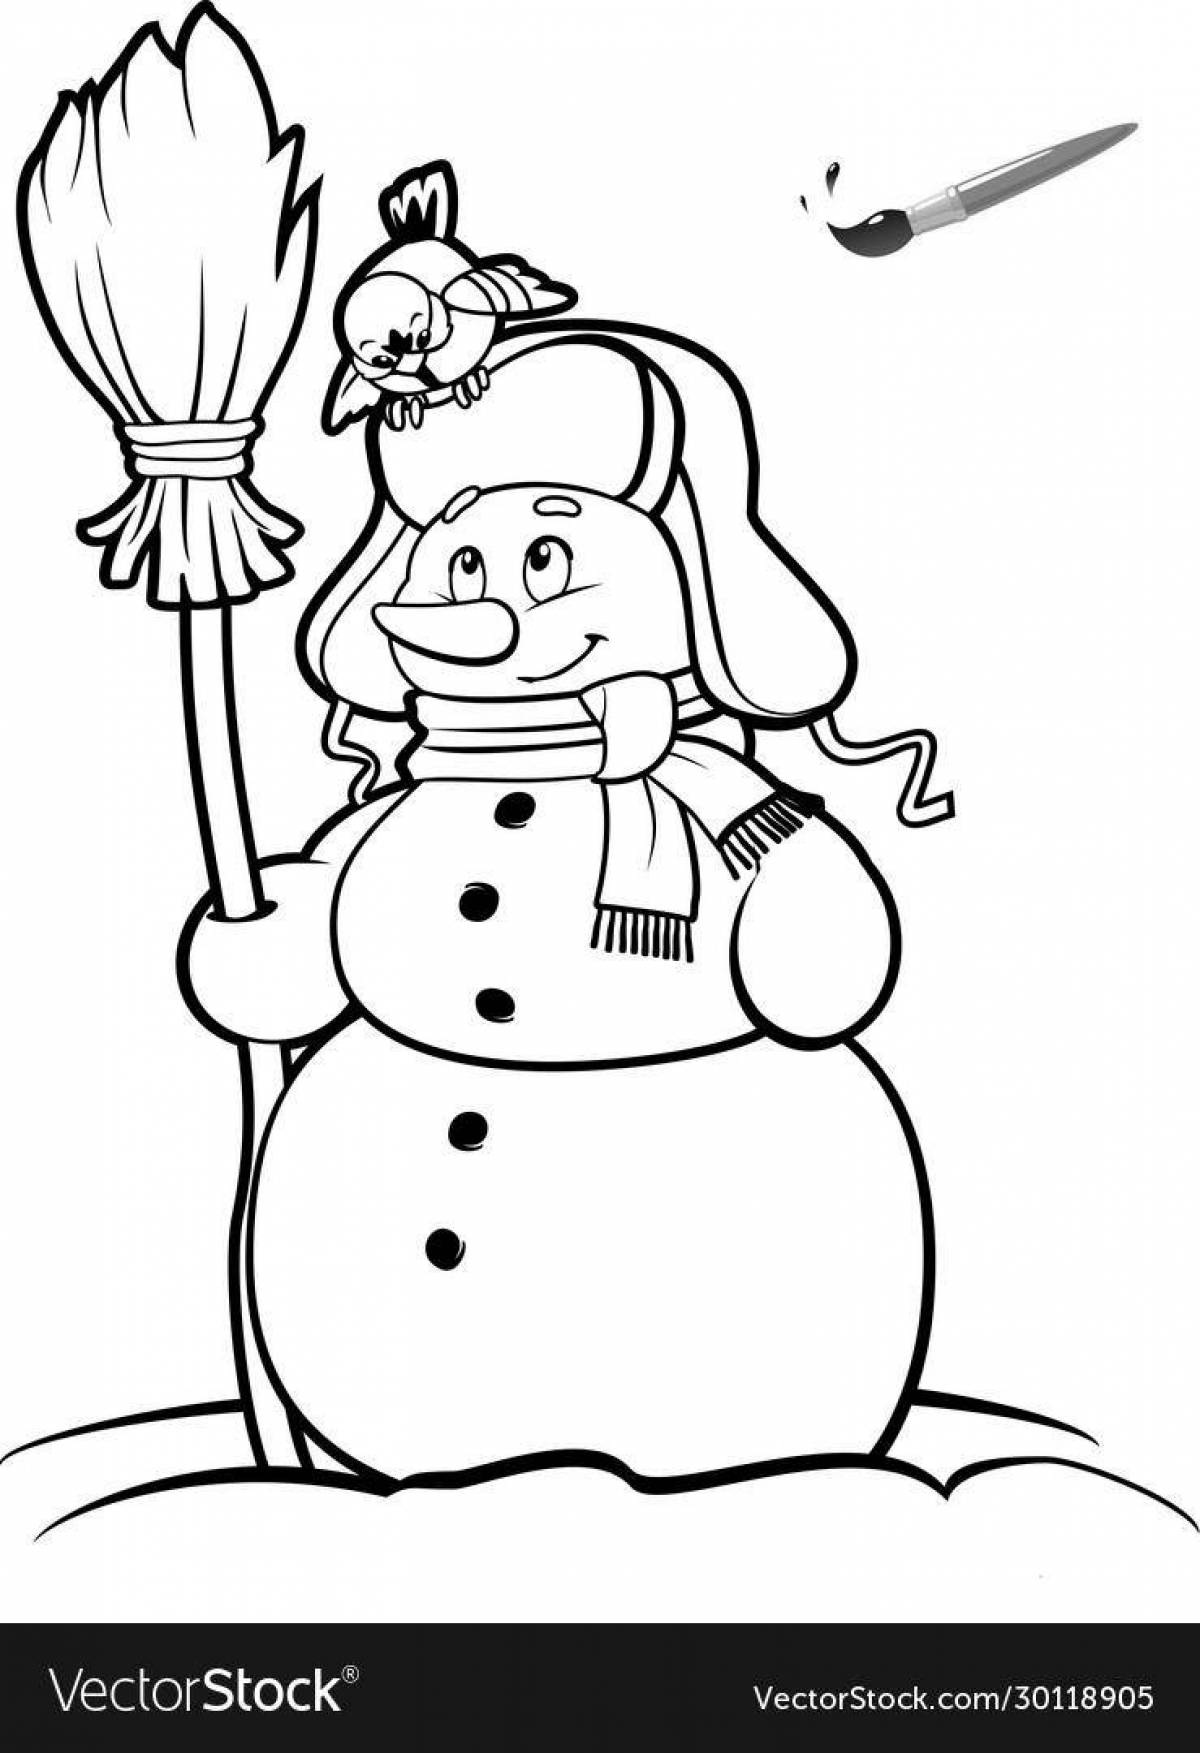 Adorable snowman with broom coloring page